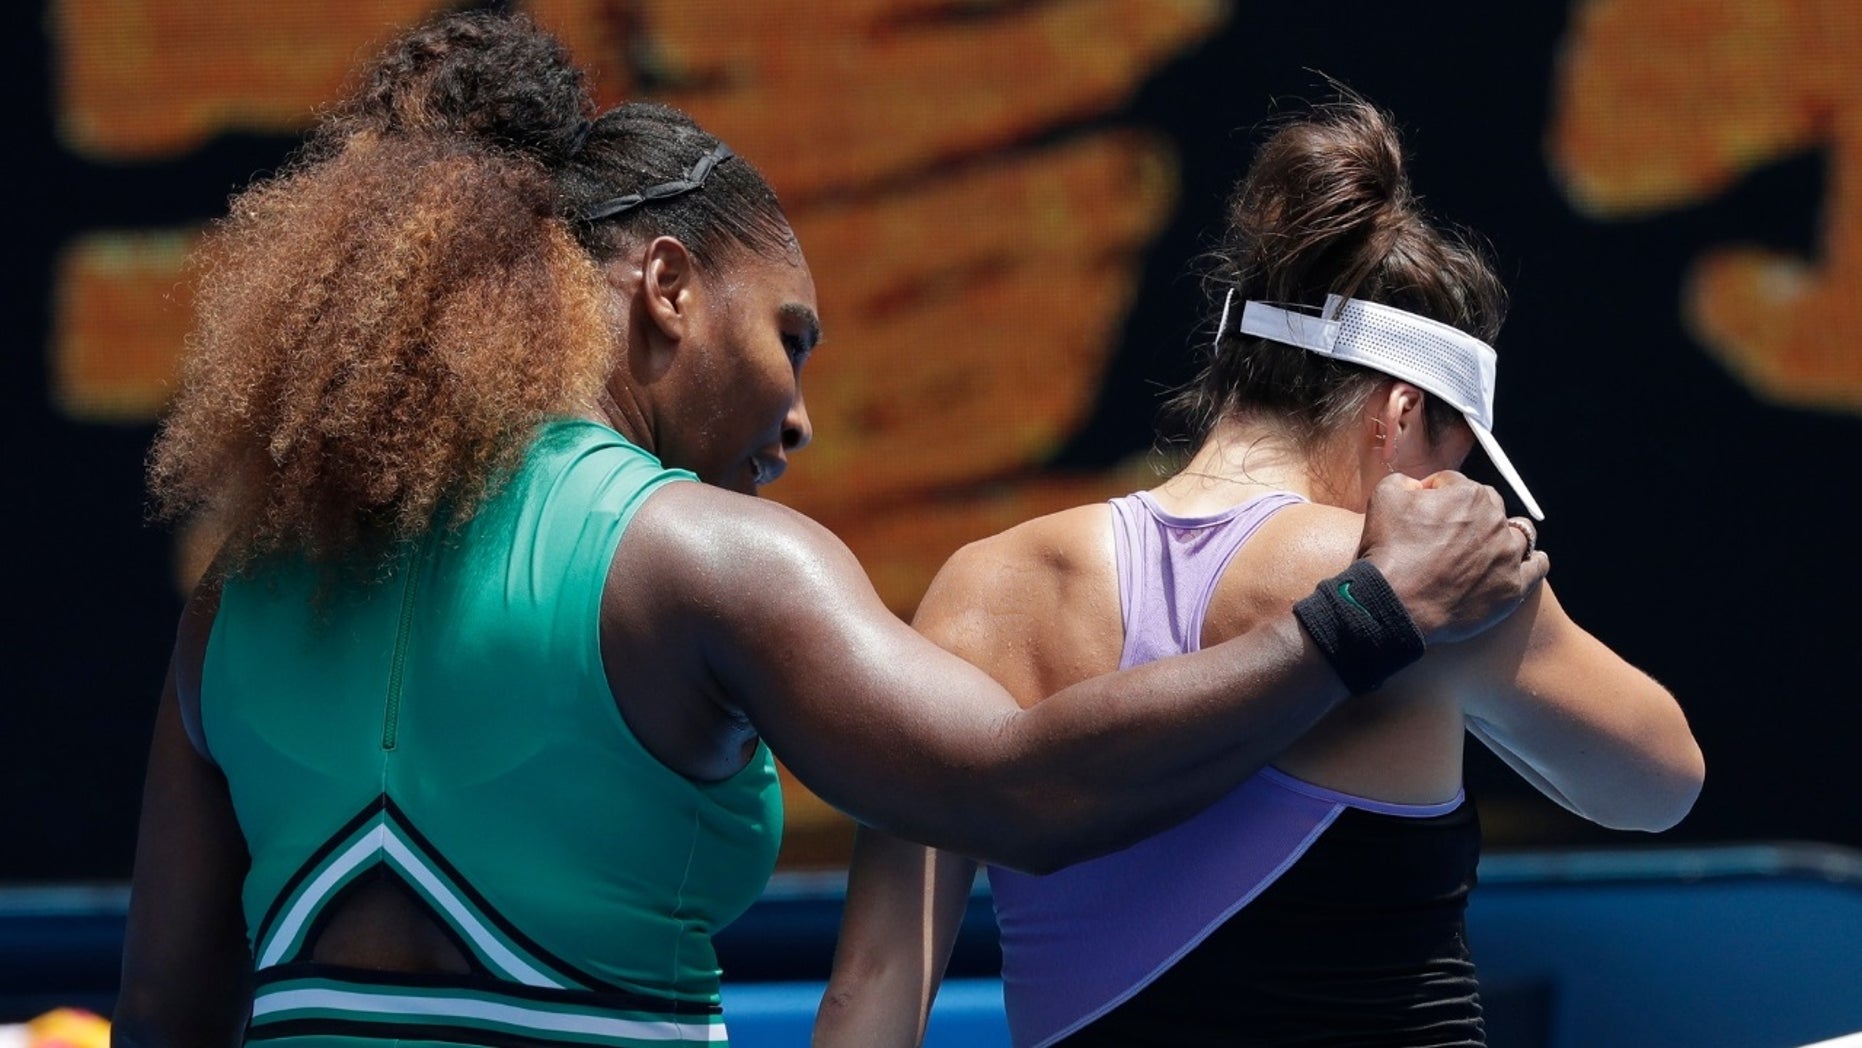 Serena Williams, Maria Sharapova offer different reactions to emotional opponents after their matches